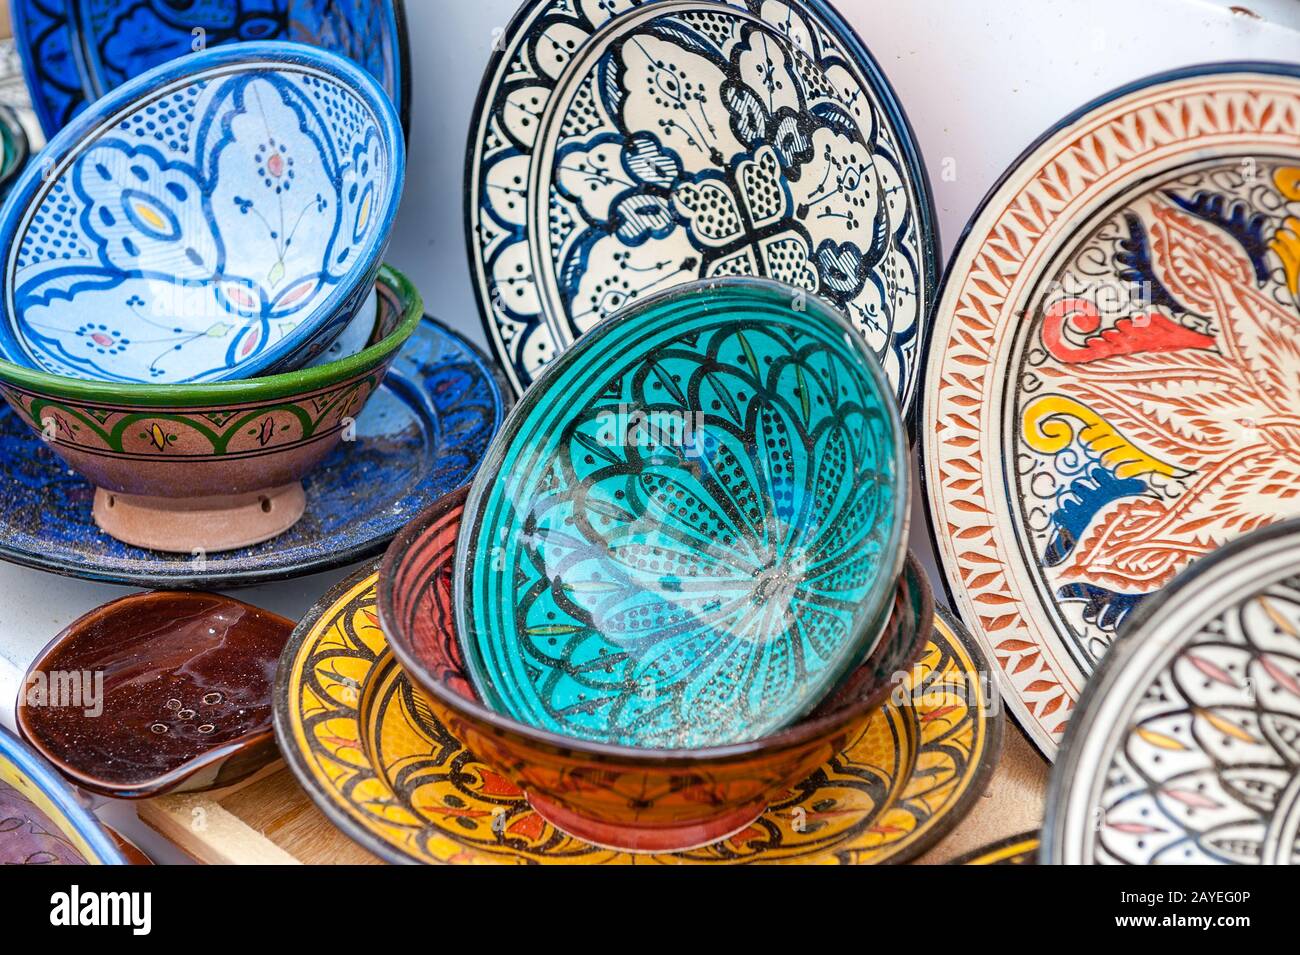 Traditional handcrafted ceramic pottery in Morocco Stock Photo